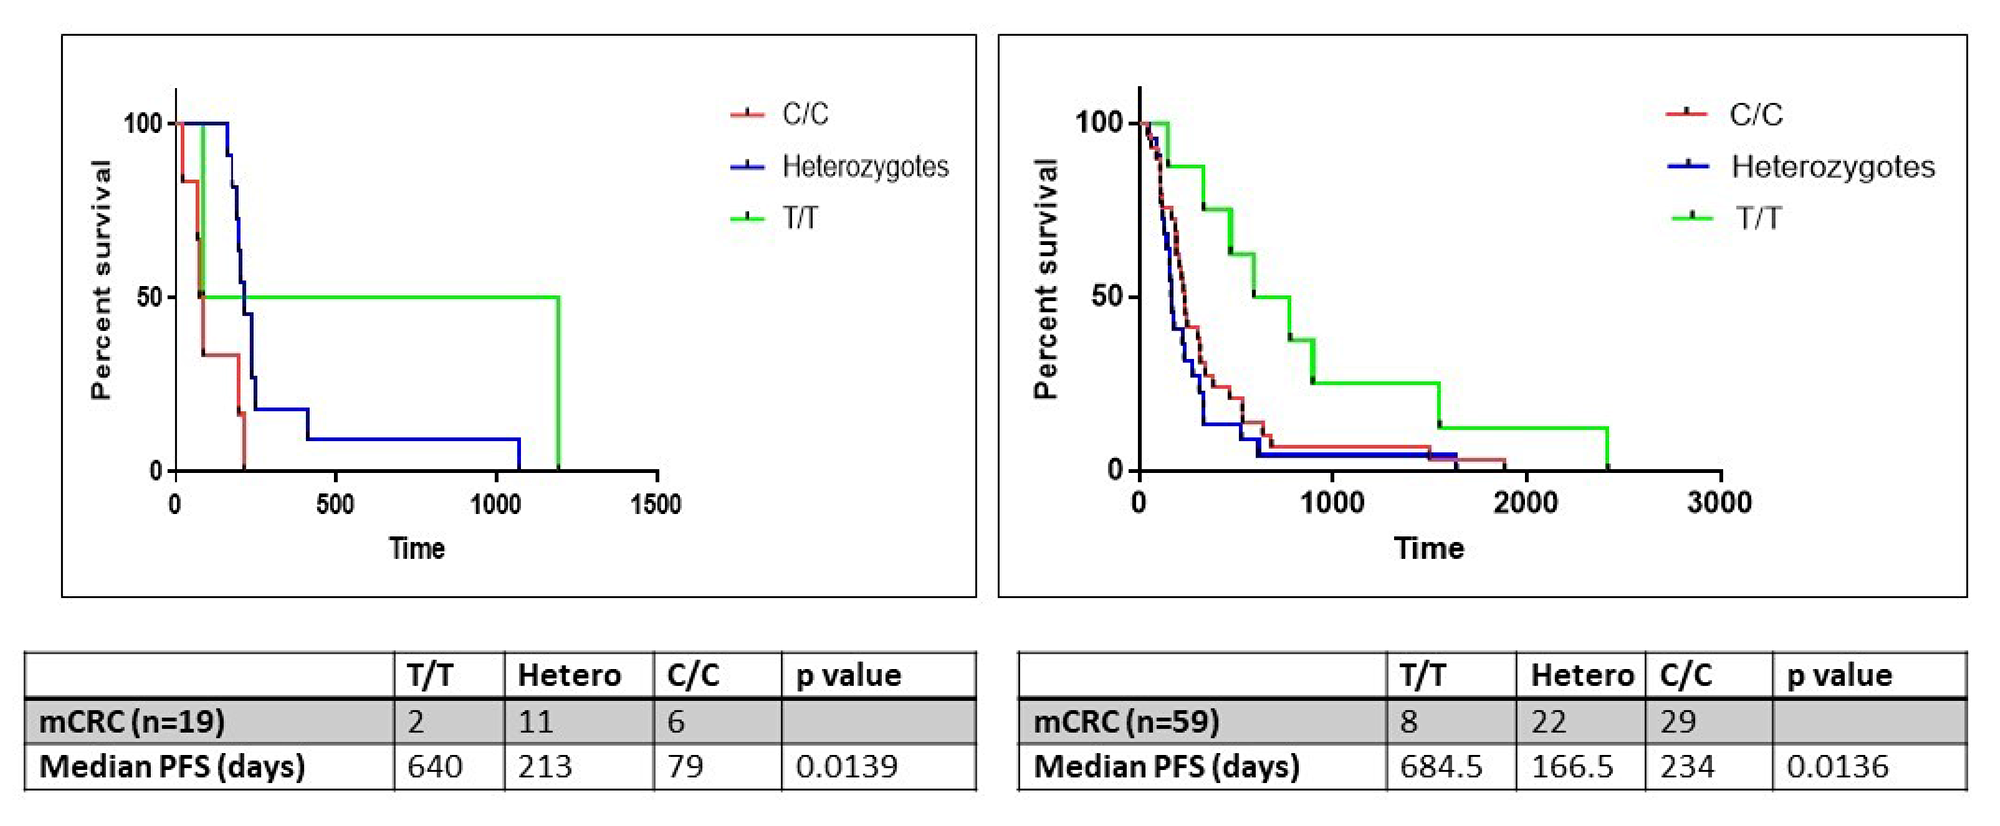 The progression free survival (PFS) analysis in the study (n=19) and validation (n=59) cohorts of patients with metastatic colorectal cancer wherein tumor tissues were obtained from an institutional biorepository.